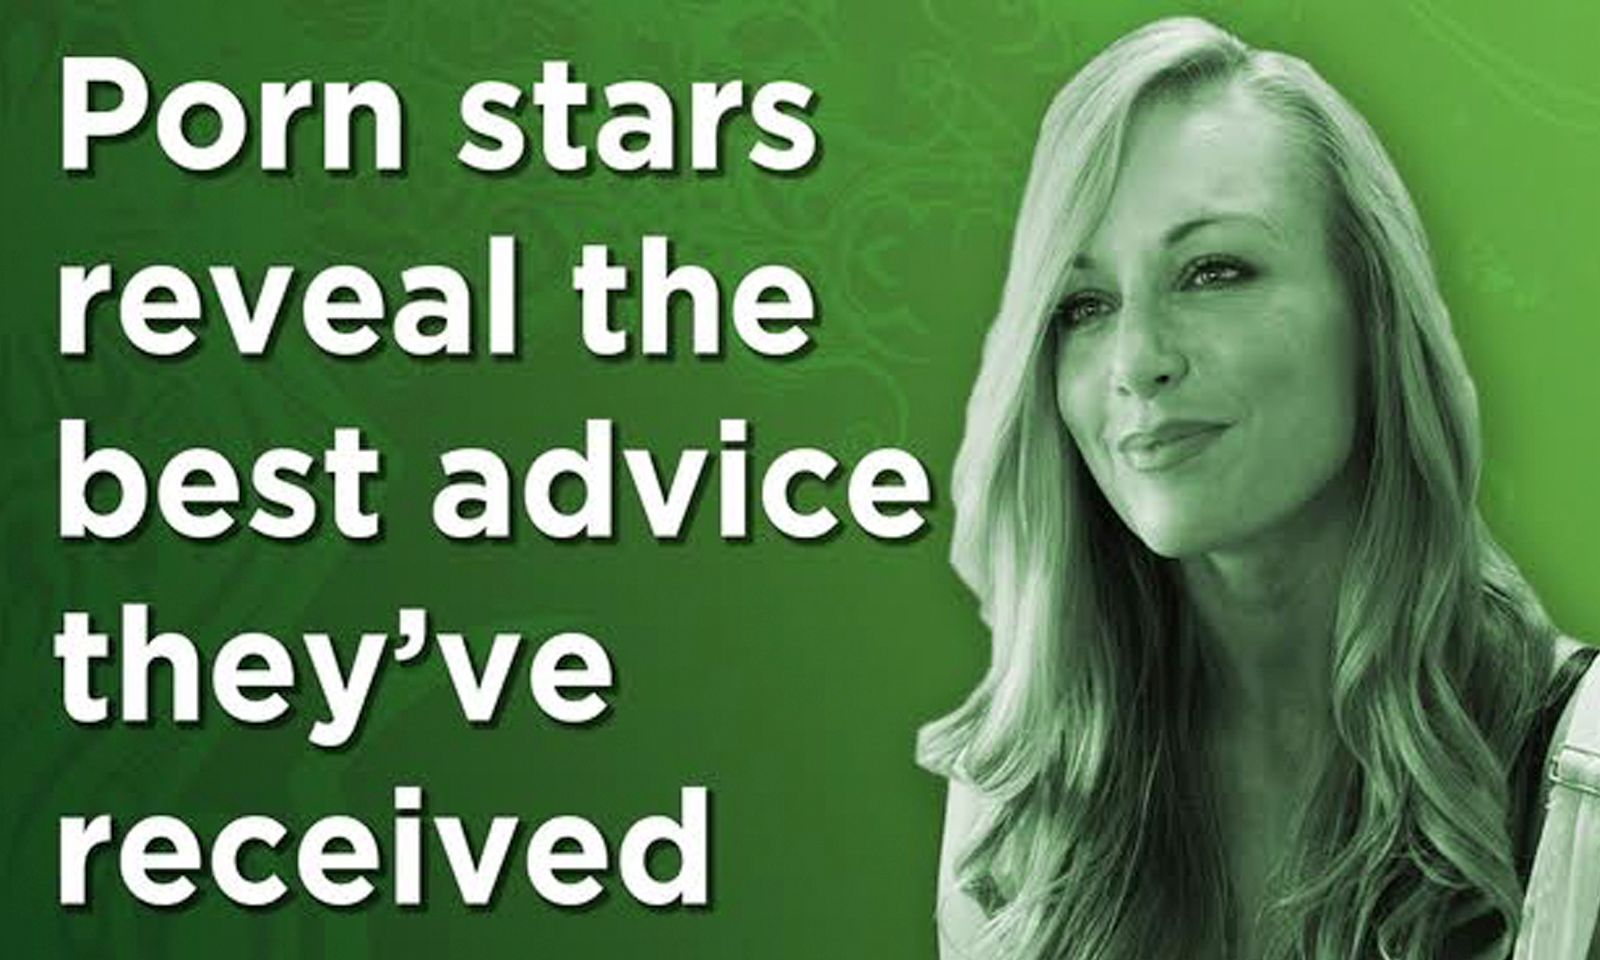 Adult Empire Learns Porn Stars’ ‘Best Advice’